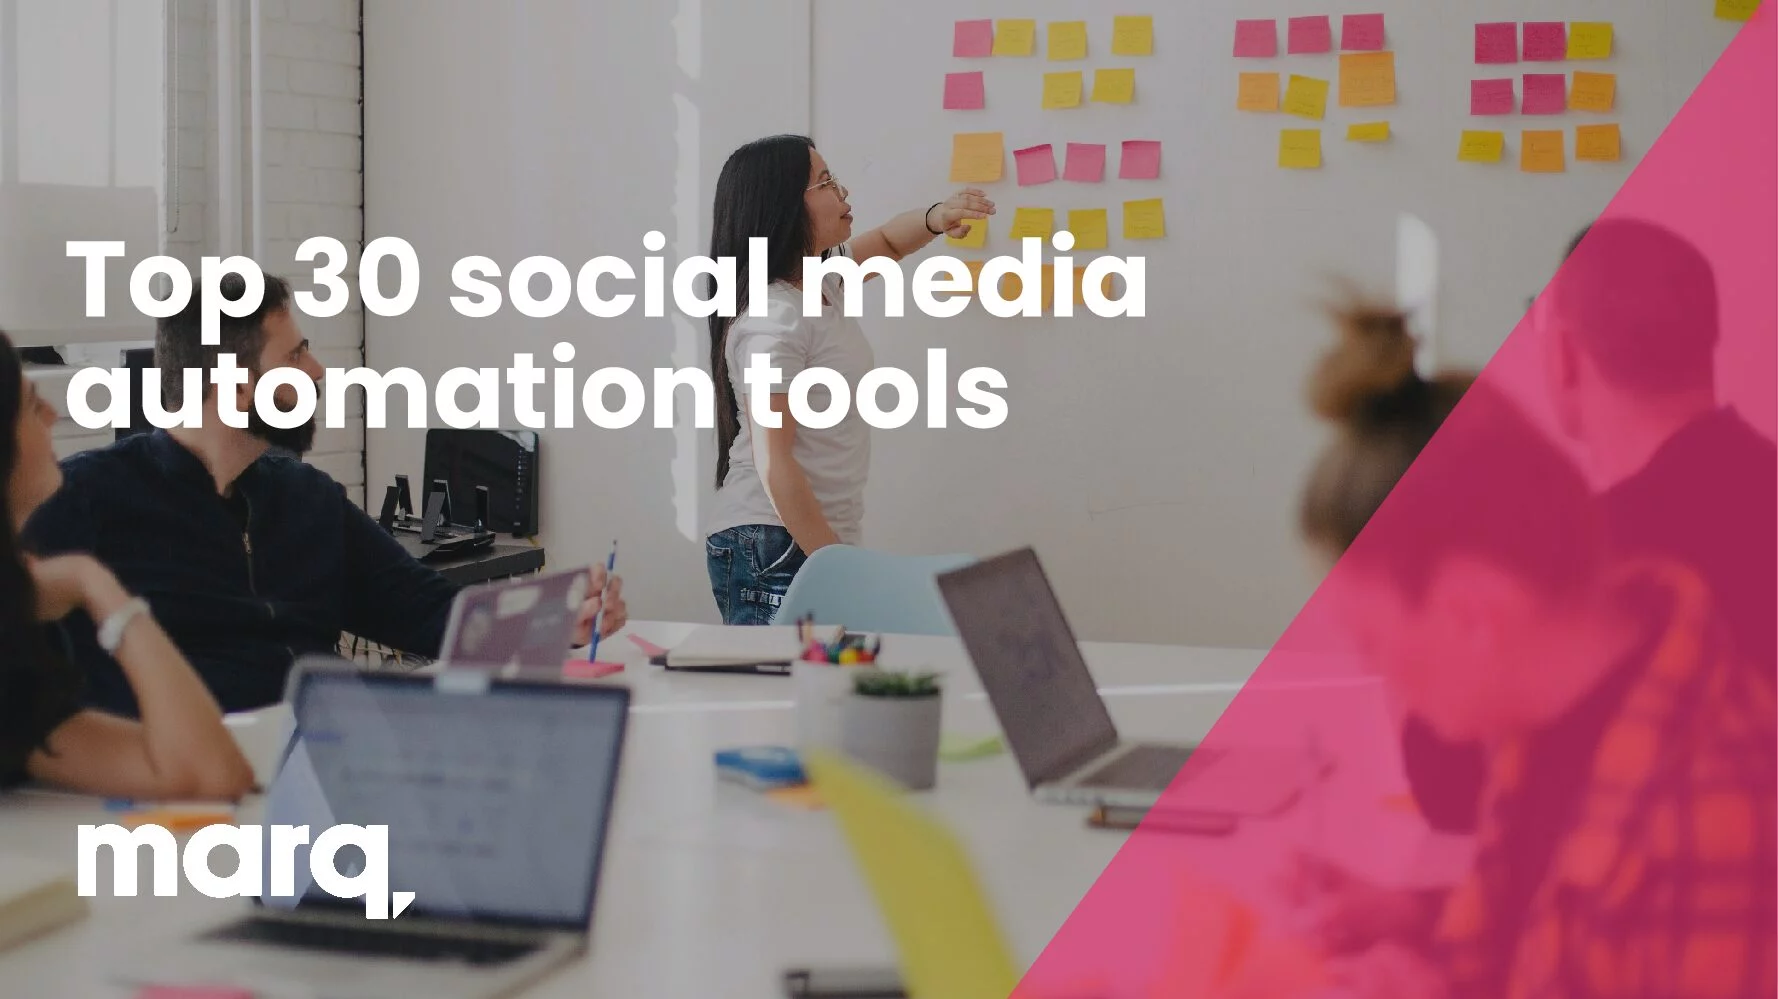 The top 30 social media automation tools